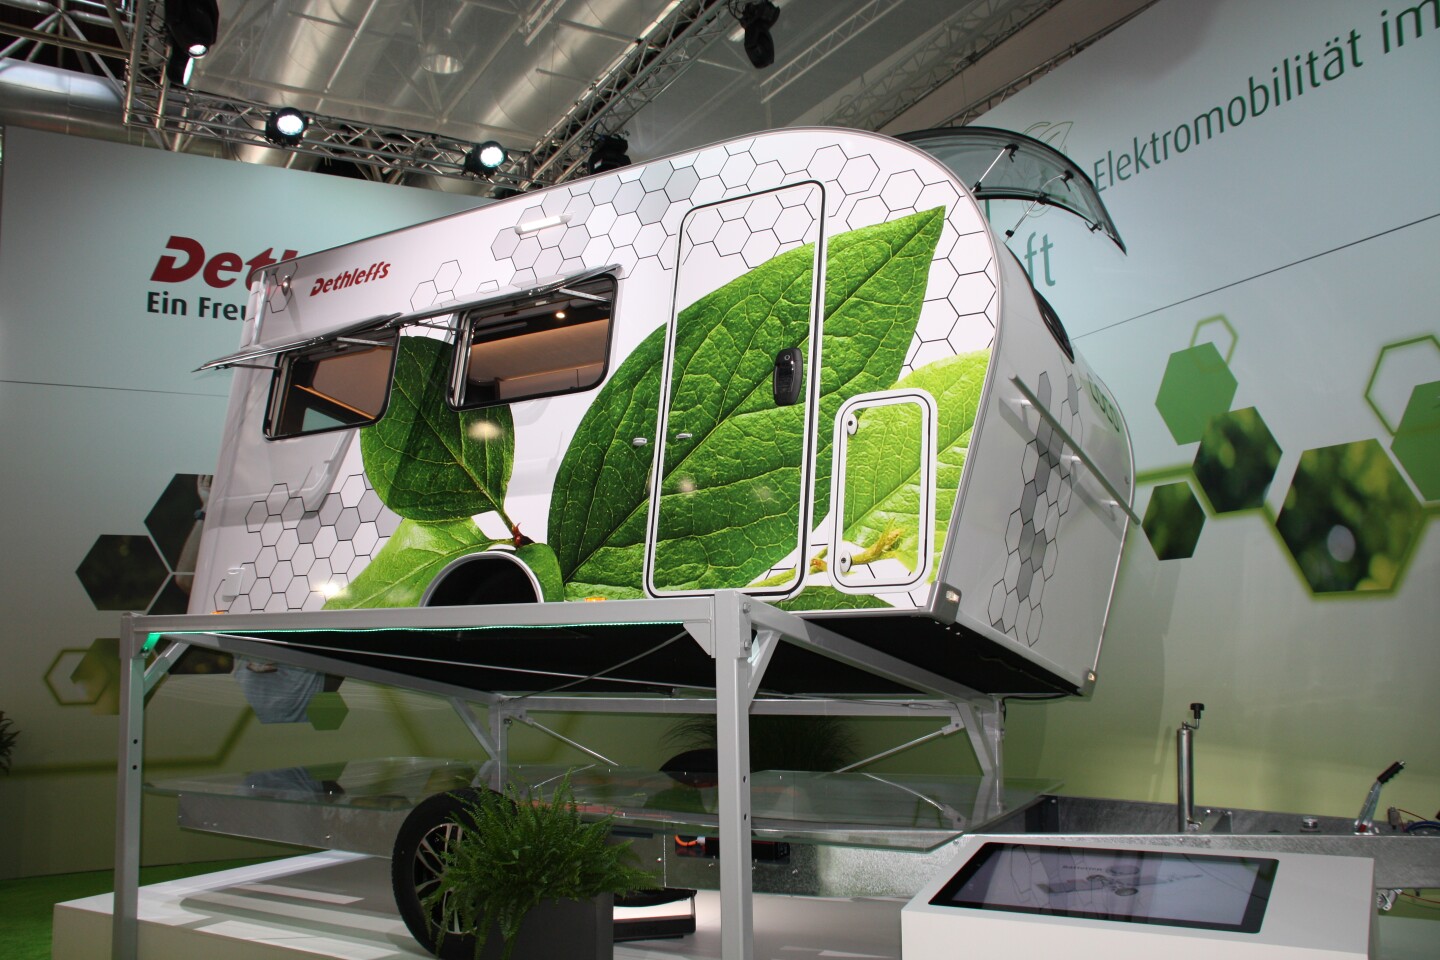 The eTrailer system is an electric drive system that could underpin a variety of self-powered caravans; here, an early prototype is paired with the Dethleffs Coco